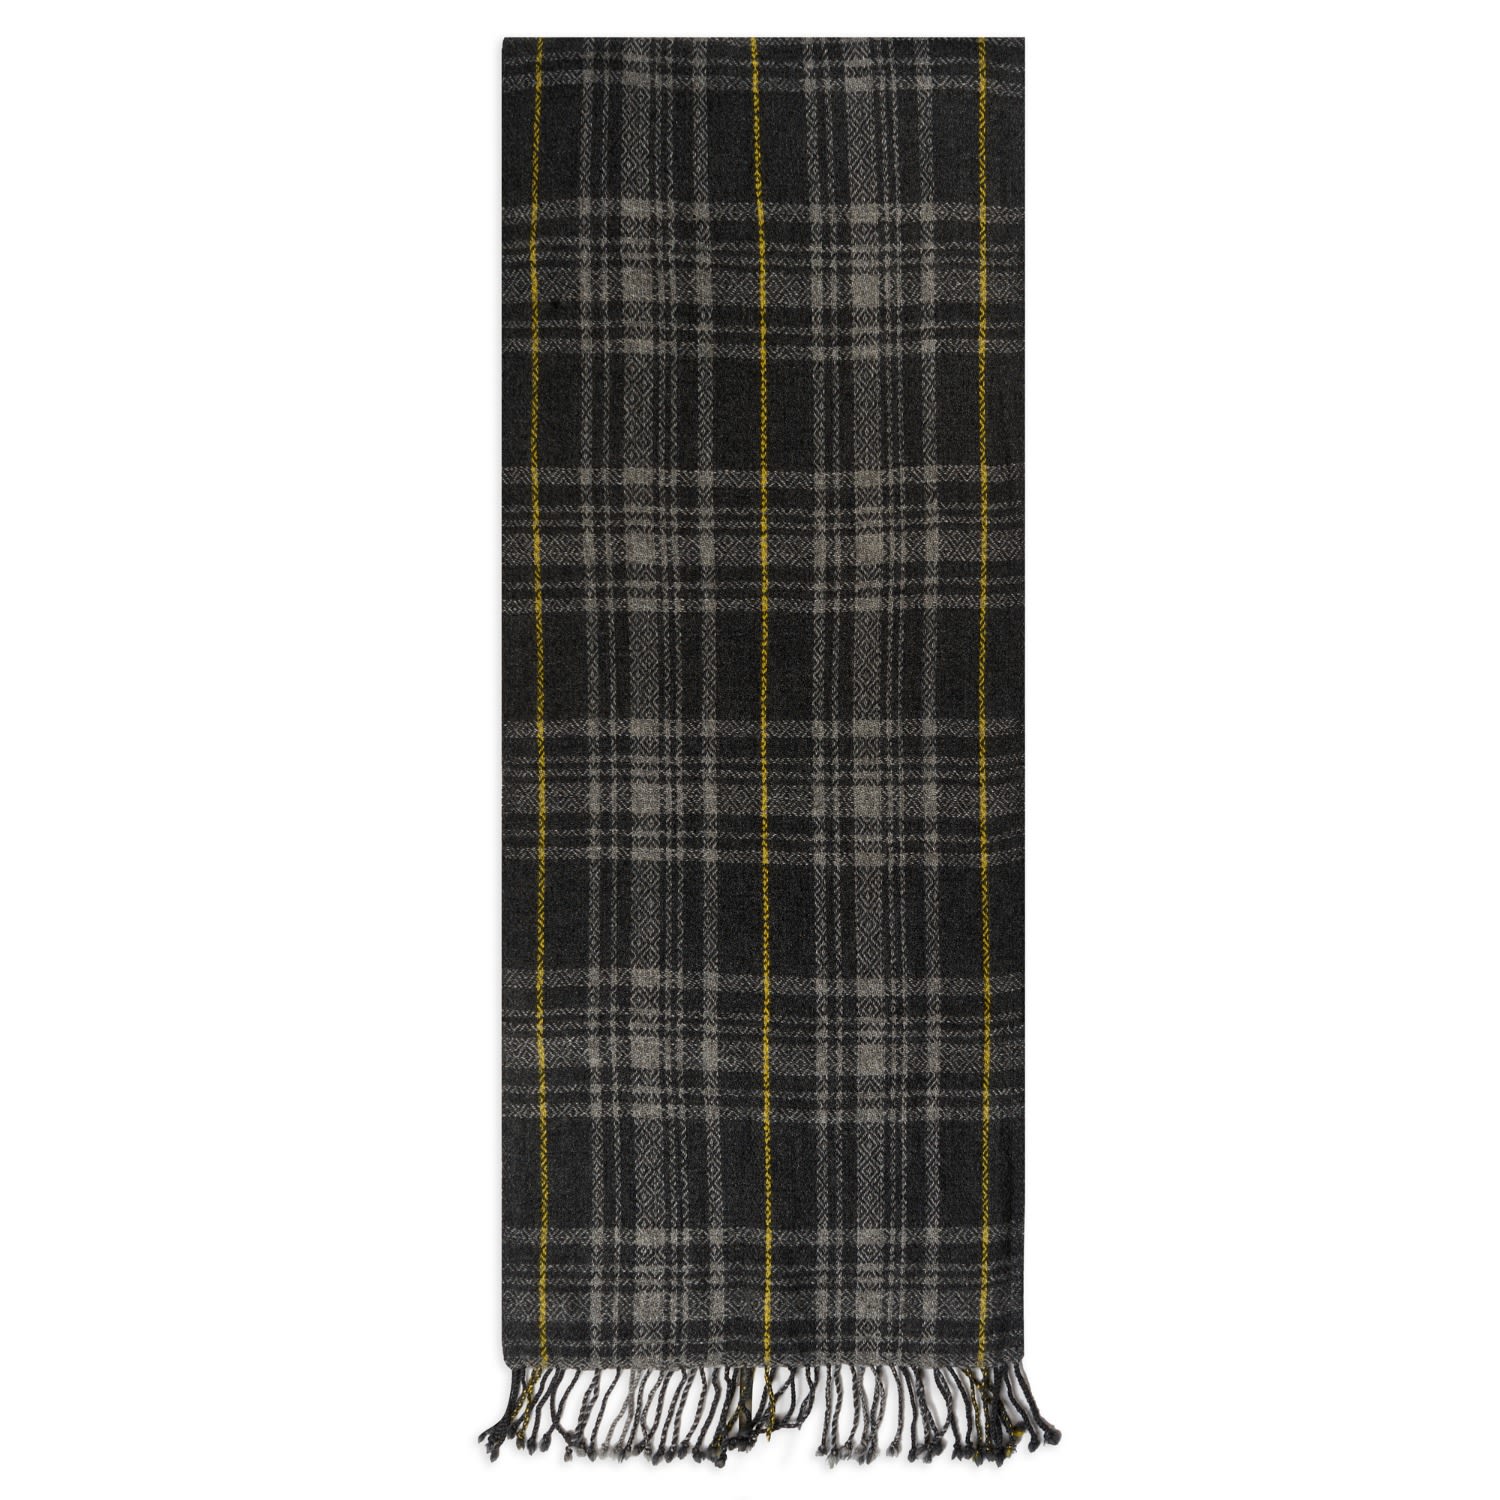 Burrows And Hare Men's Cashmere & Merino Wool Scarf - Stitched Grey